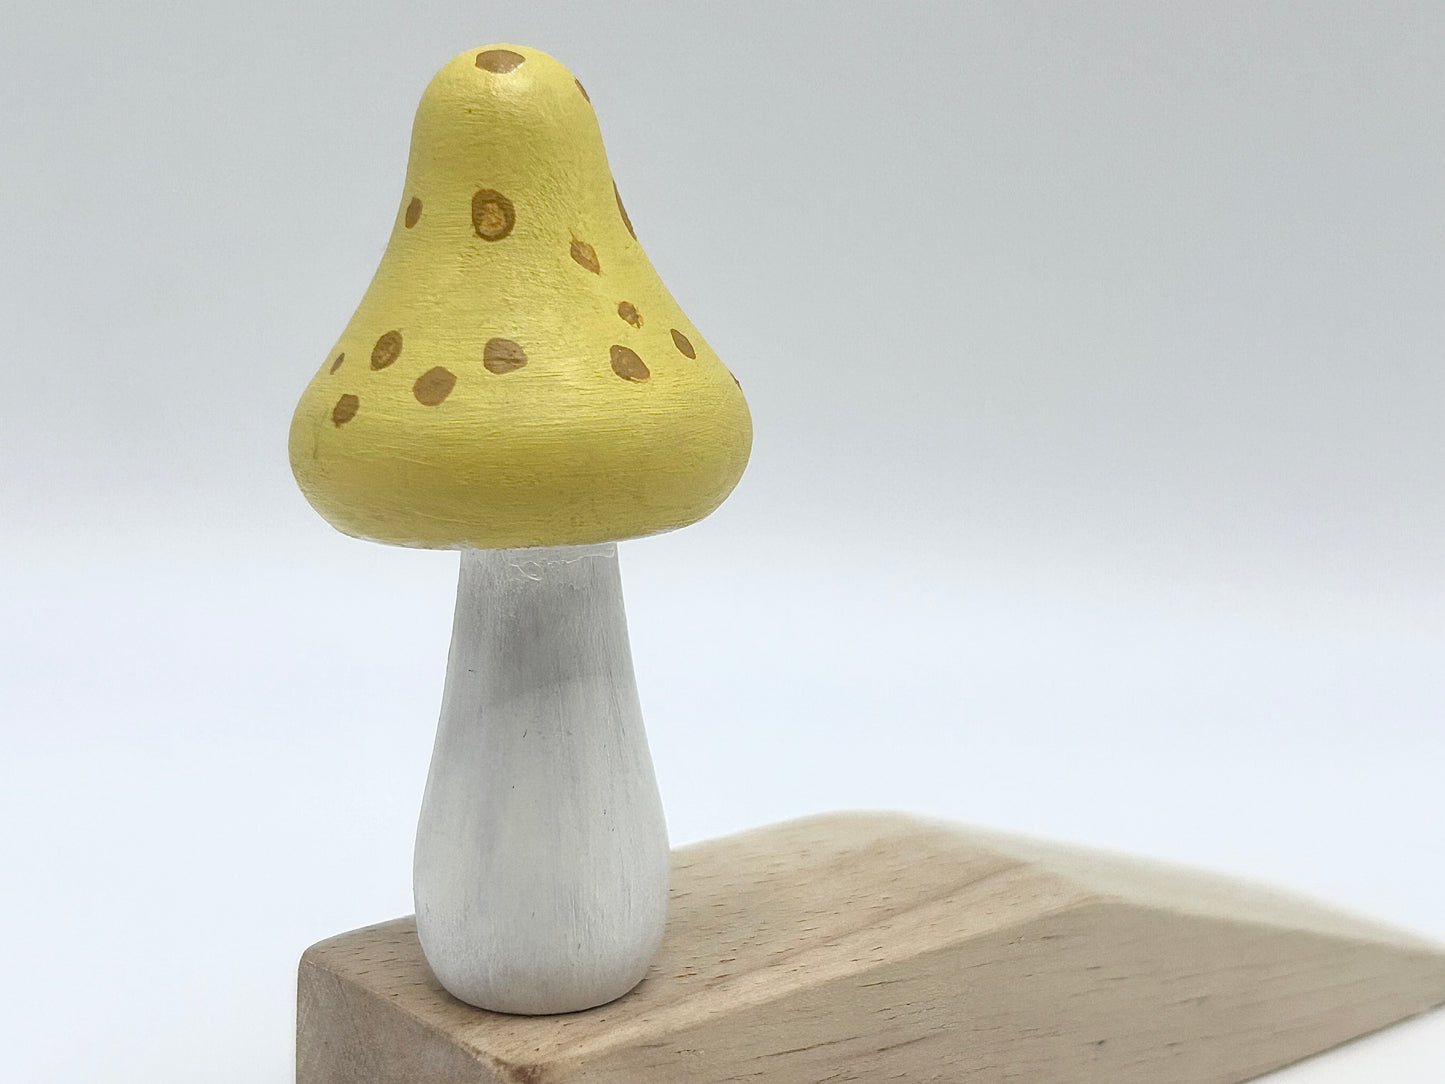 Enchanted Grove: Doorstop with Woodcarve Mushroom Ornament